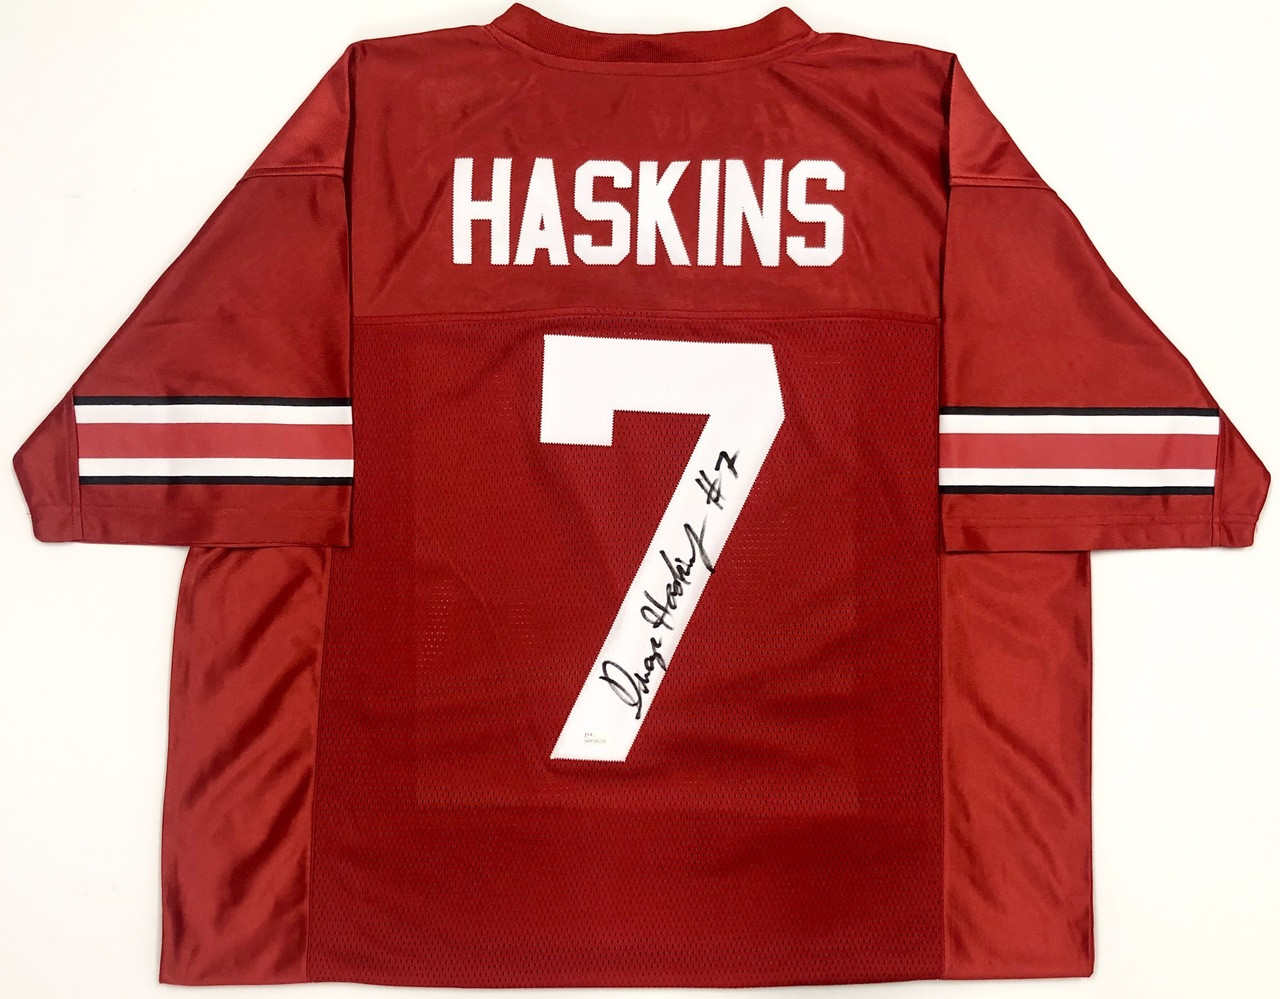 Dwayne Haskins Ohio State Buckeyes Autographed OFFICIALLY LICENSED Jersey - JSA Witness Authentic